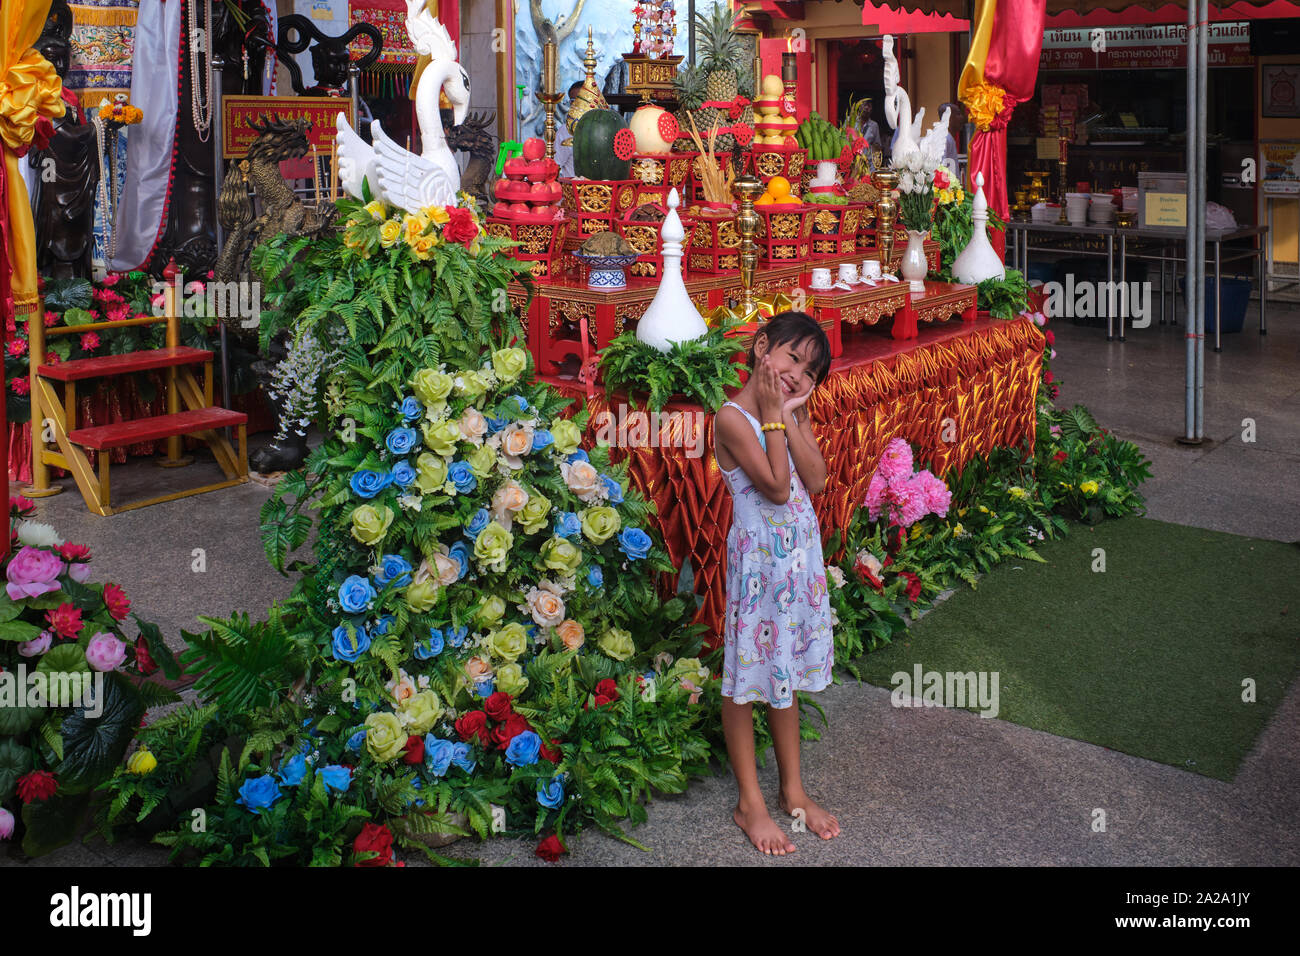 A girl poses in front of a shrine in Pud Jor Temple, a Chinese temple in Phuket Town, Phuket, Thailand Stock Photo